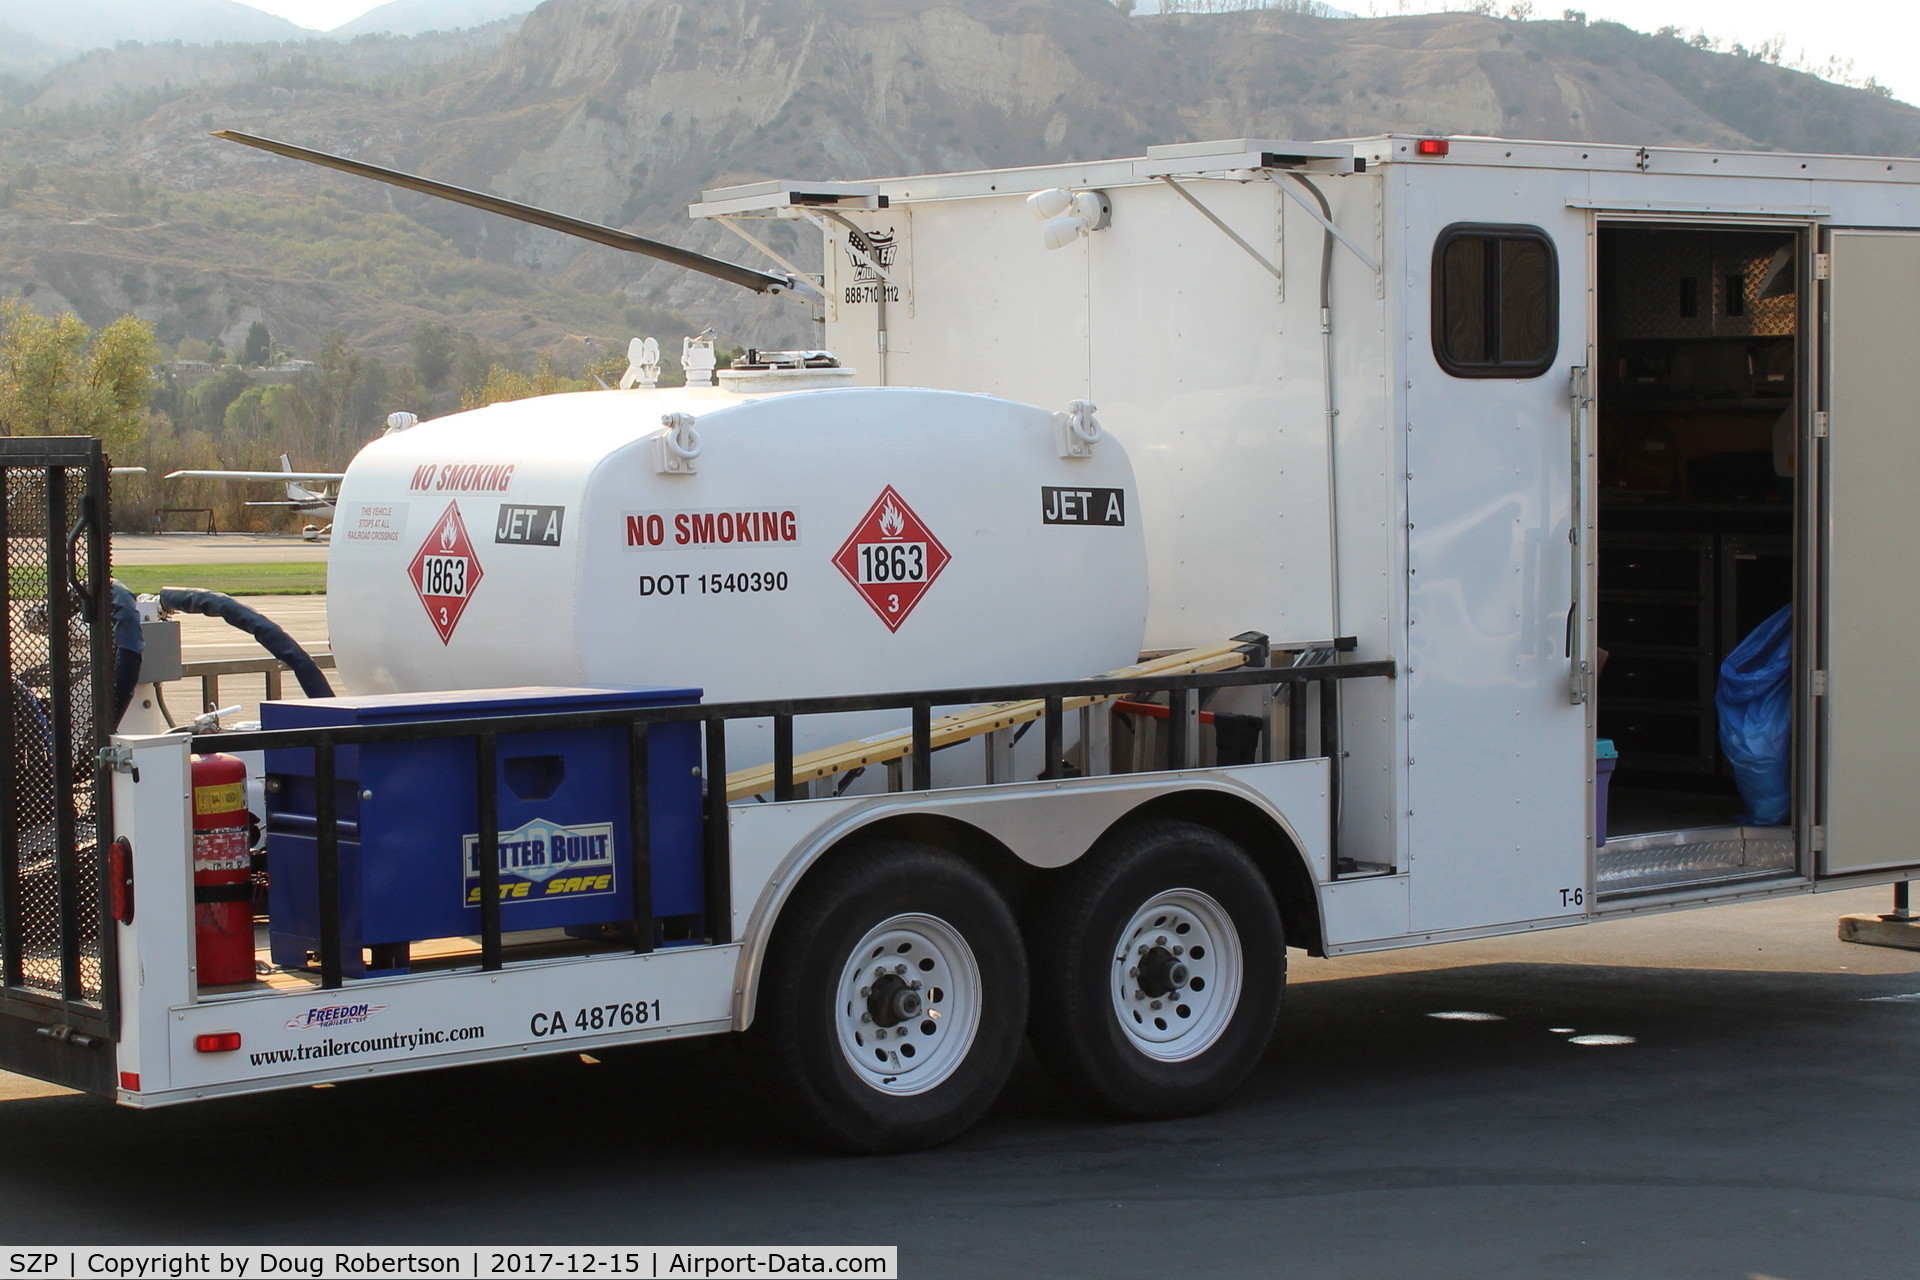 Santa Paula Airport (SZP) - Support vehicle with Jet-A fuel, one of many at the SZP Firebase